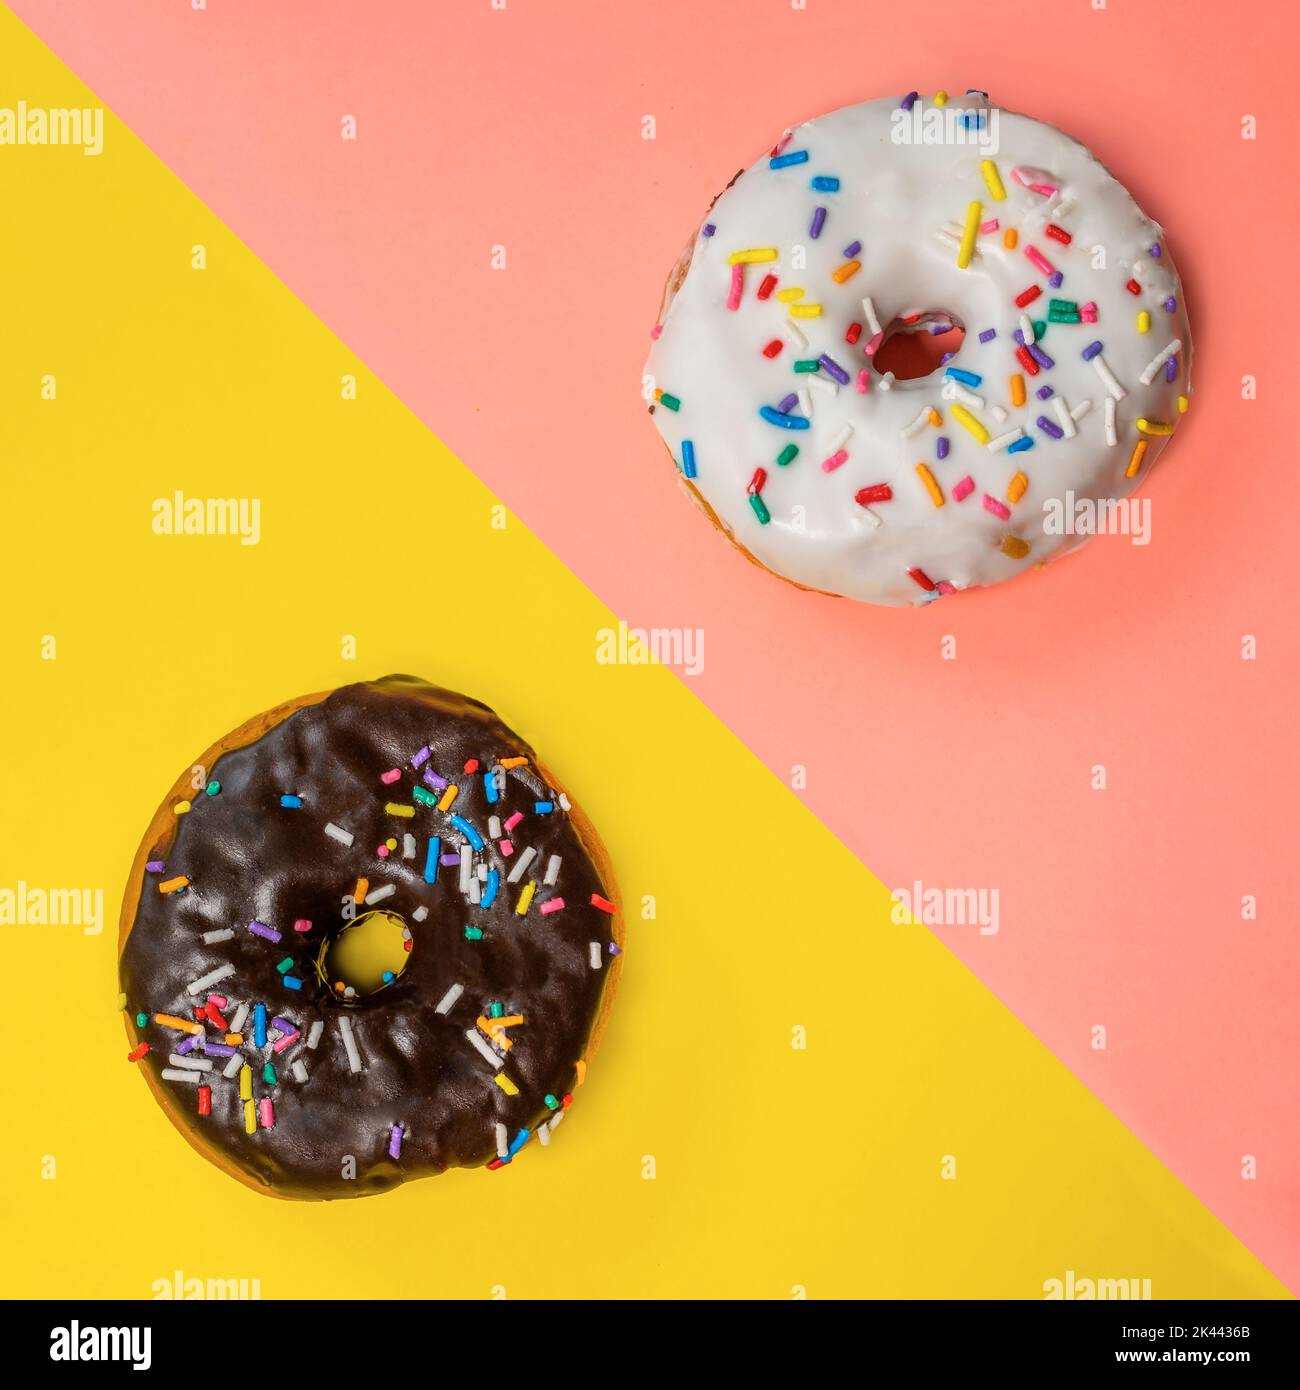 Overhead view of two donuts with icing and sprinkles on multi-colored background Stock Photo